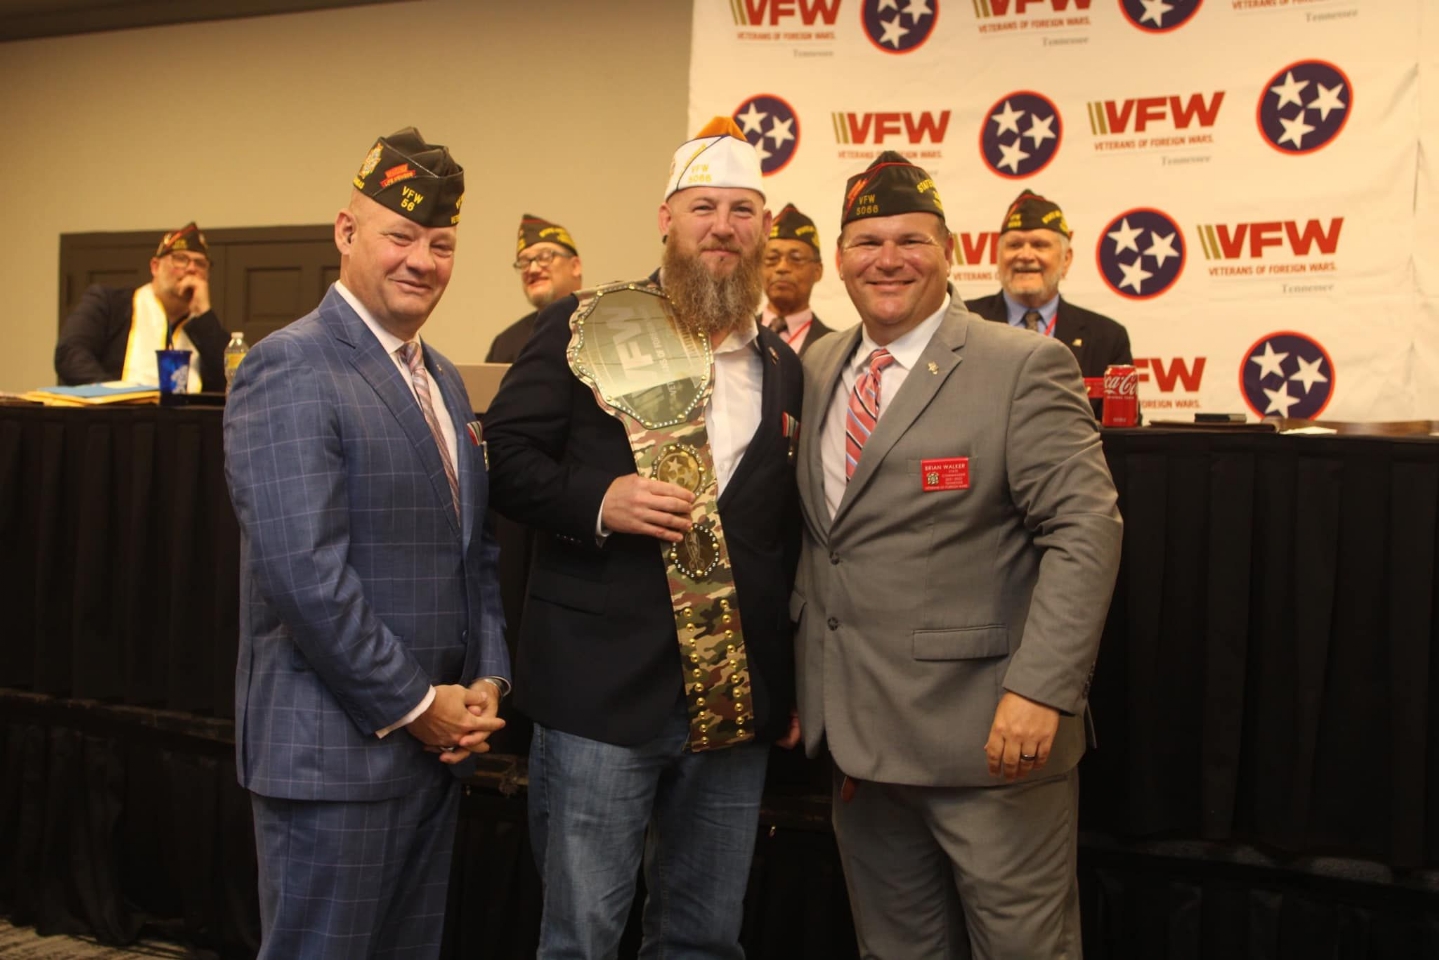 Daniel Basden accepting the Post Community Service Award Championship Belt at the Tennessee State Convention in Nashville, TN. (left to right are Lynn Rolff, Daniel Basden, Brian Walker)